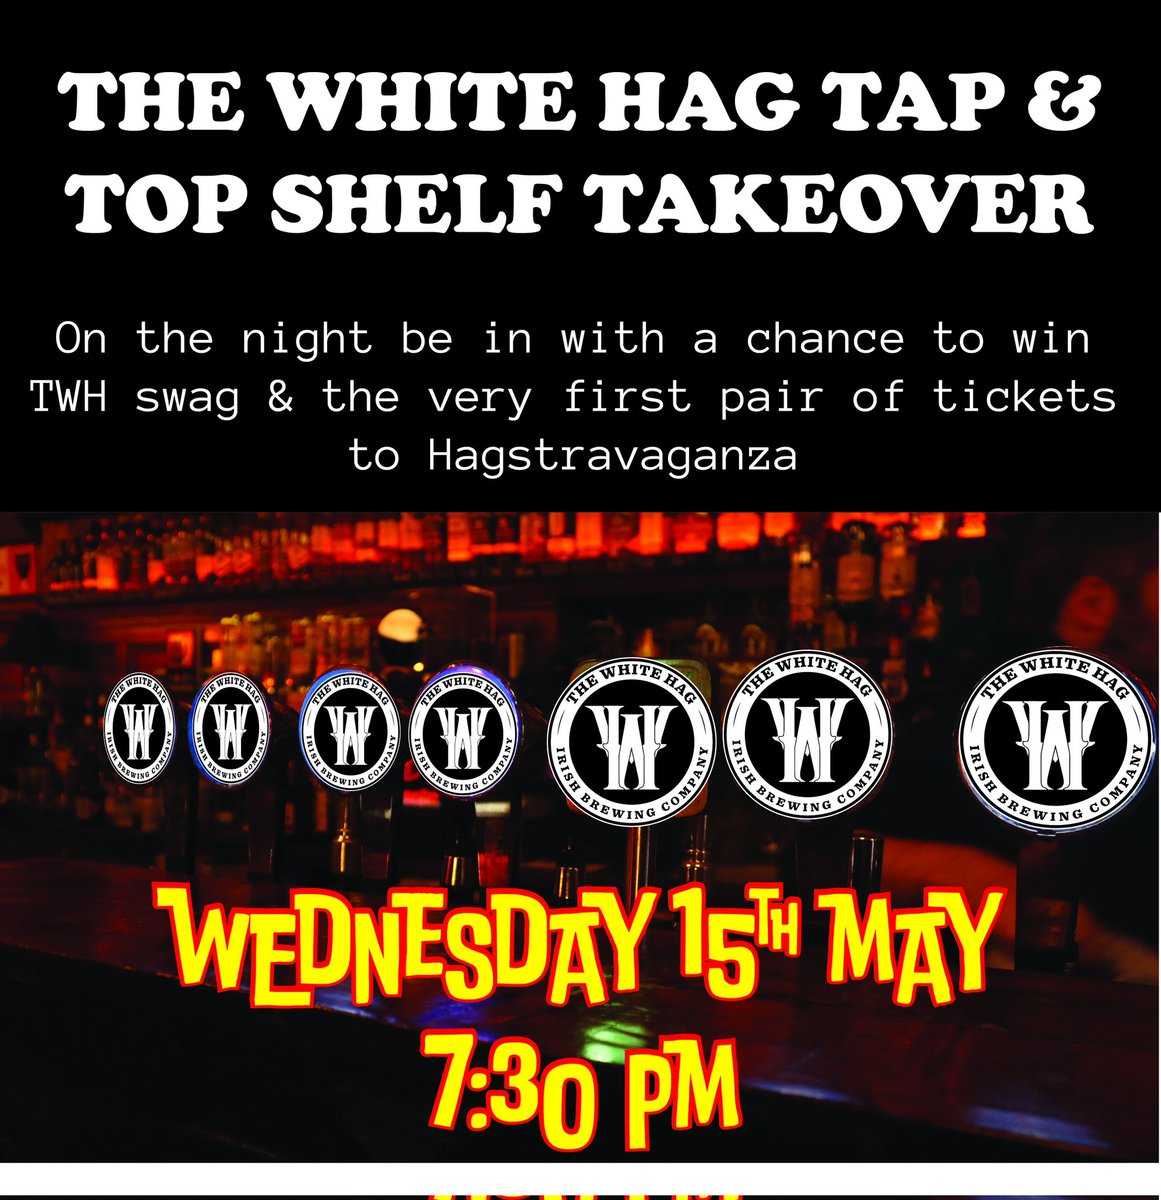 This coming Wednesday we are inviting @TheWhiteHag to take over our taps and pour some top shelf whiskey. It begins at 7:30pm and there will be swag on the evening. In addition a pair of tickets for Hagstravaganza will be up for grabs. Don't have Wednesday envy.